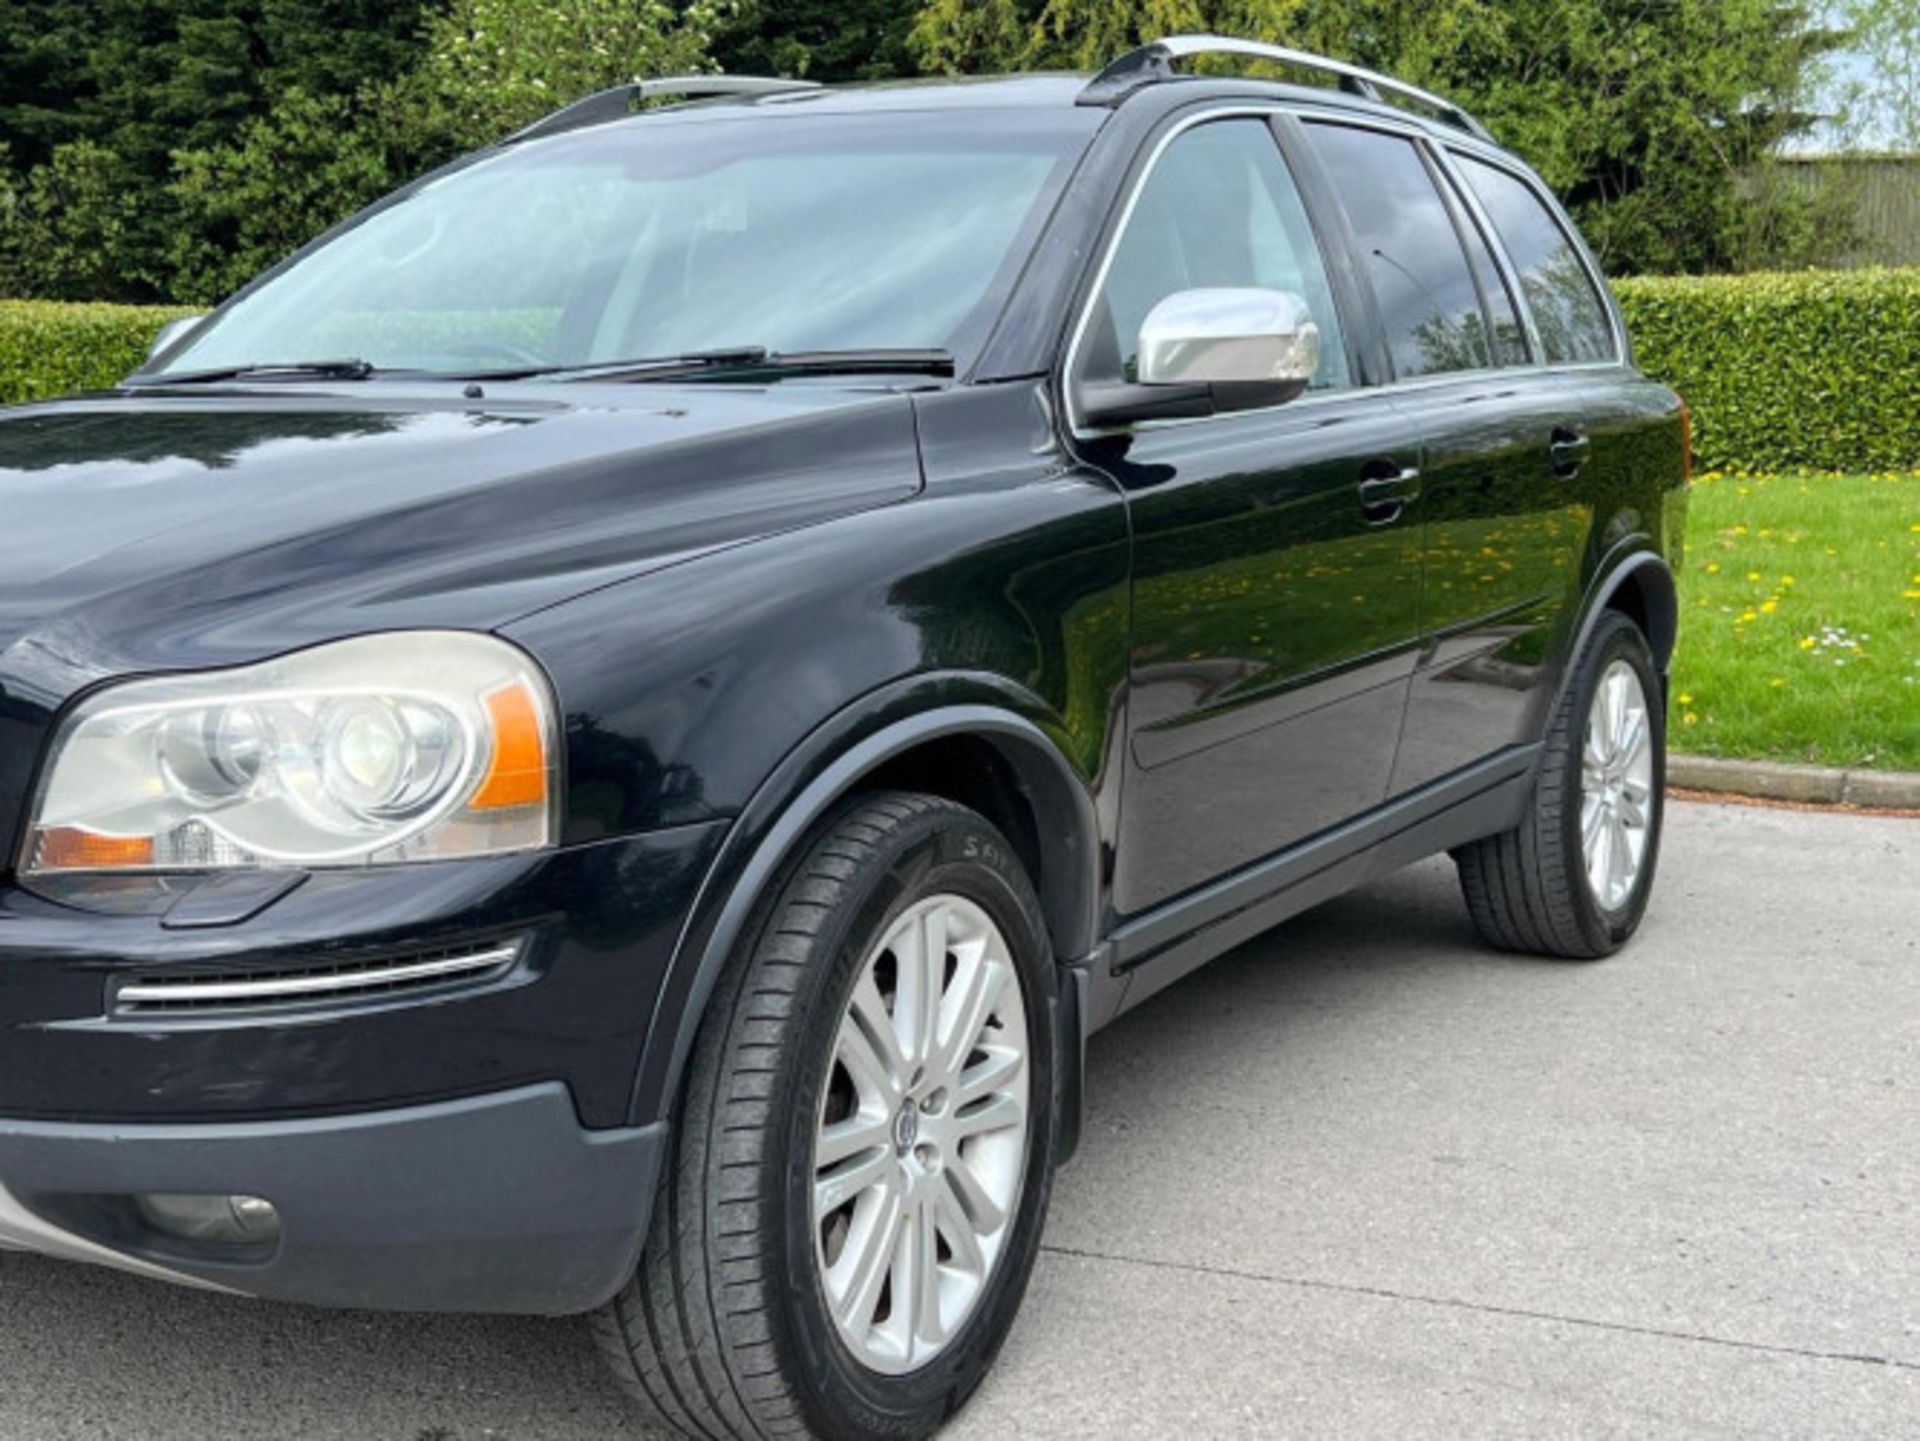 VOLVO XC90 2.4 D5 EXECUTIVE GEARTRONIC AWD, 5DR >>--NO VAT ON HAMMER--<< - Image 129 of 136